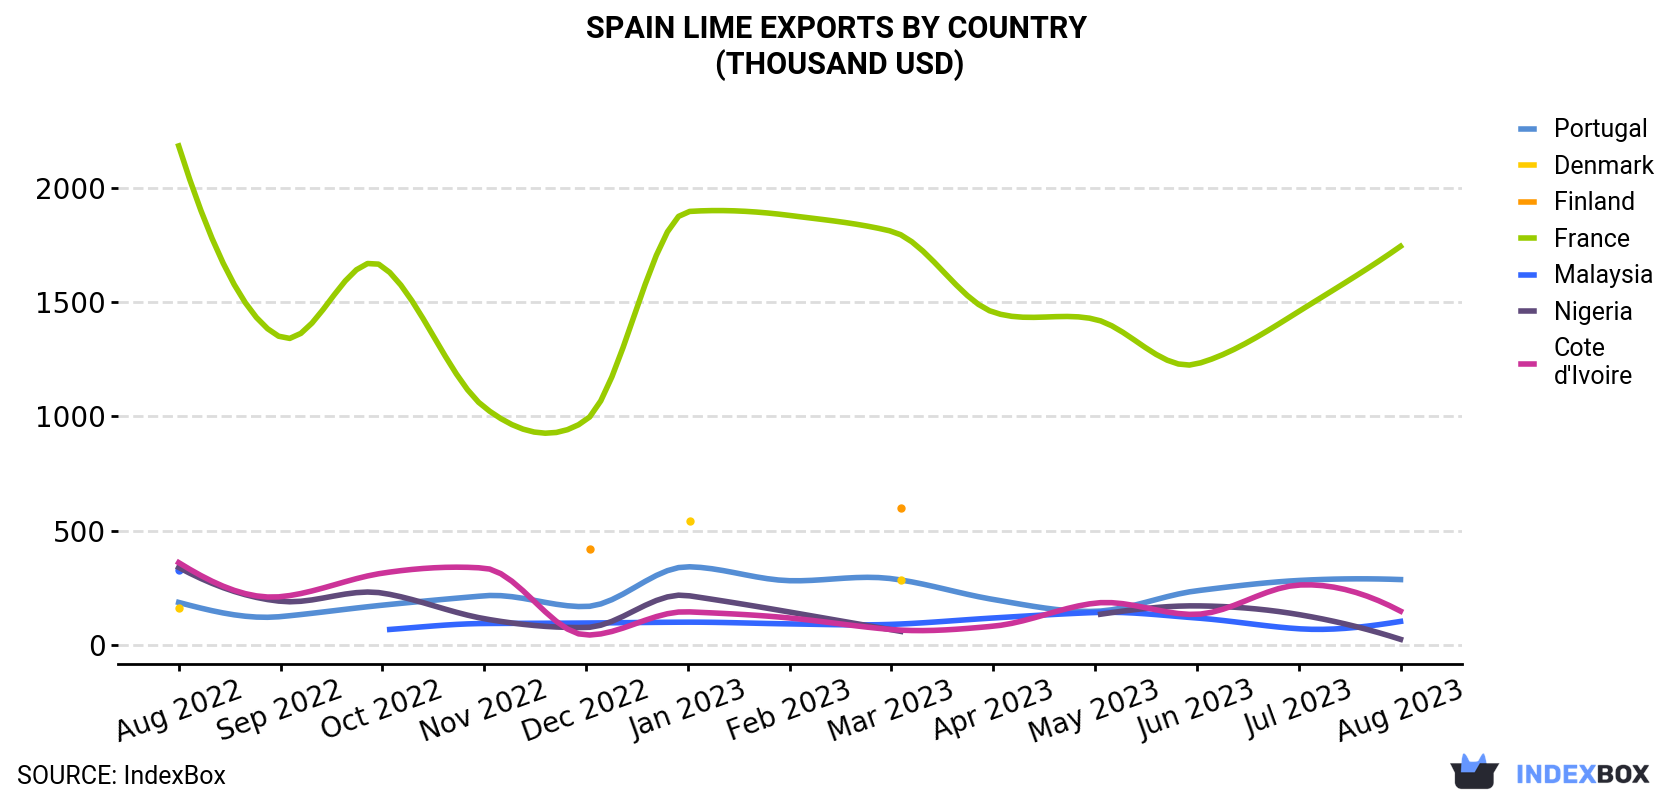 Spain Lime Exports By Country (Thousand USD)